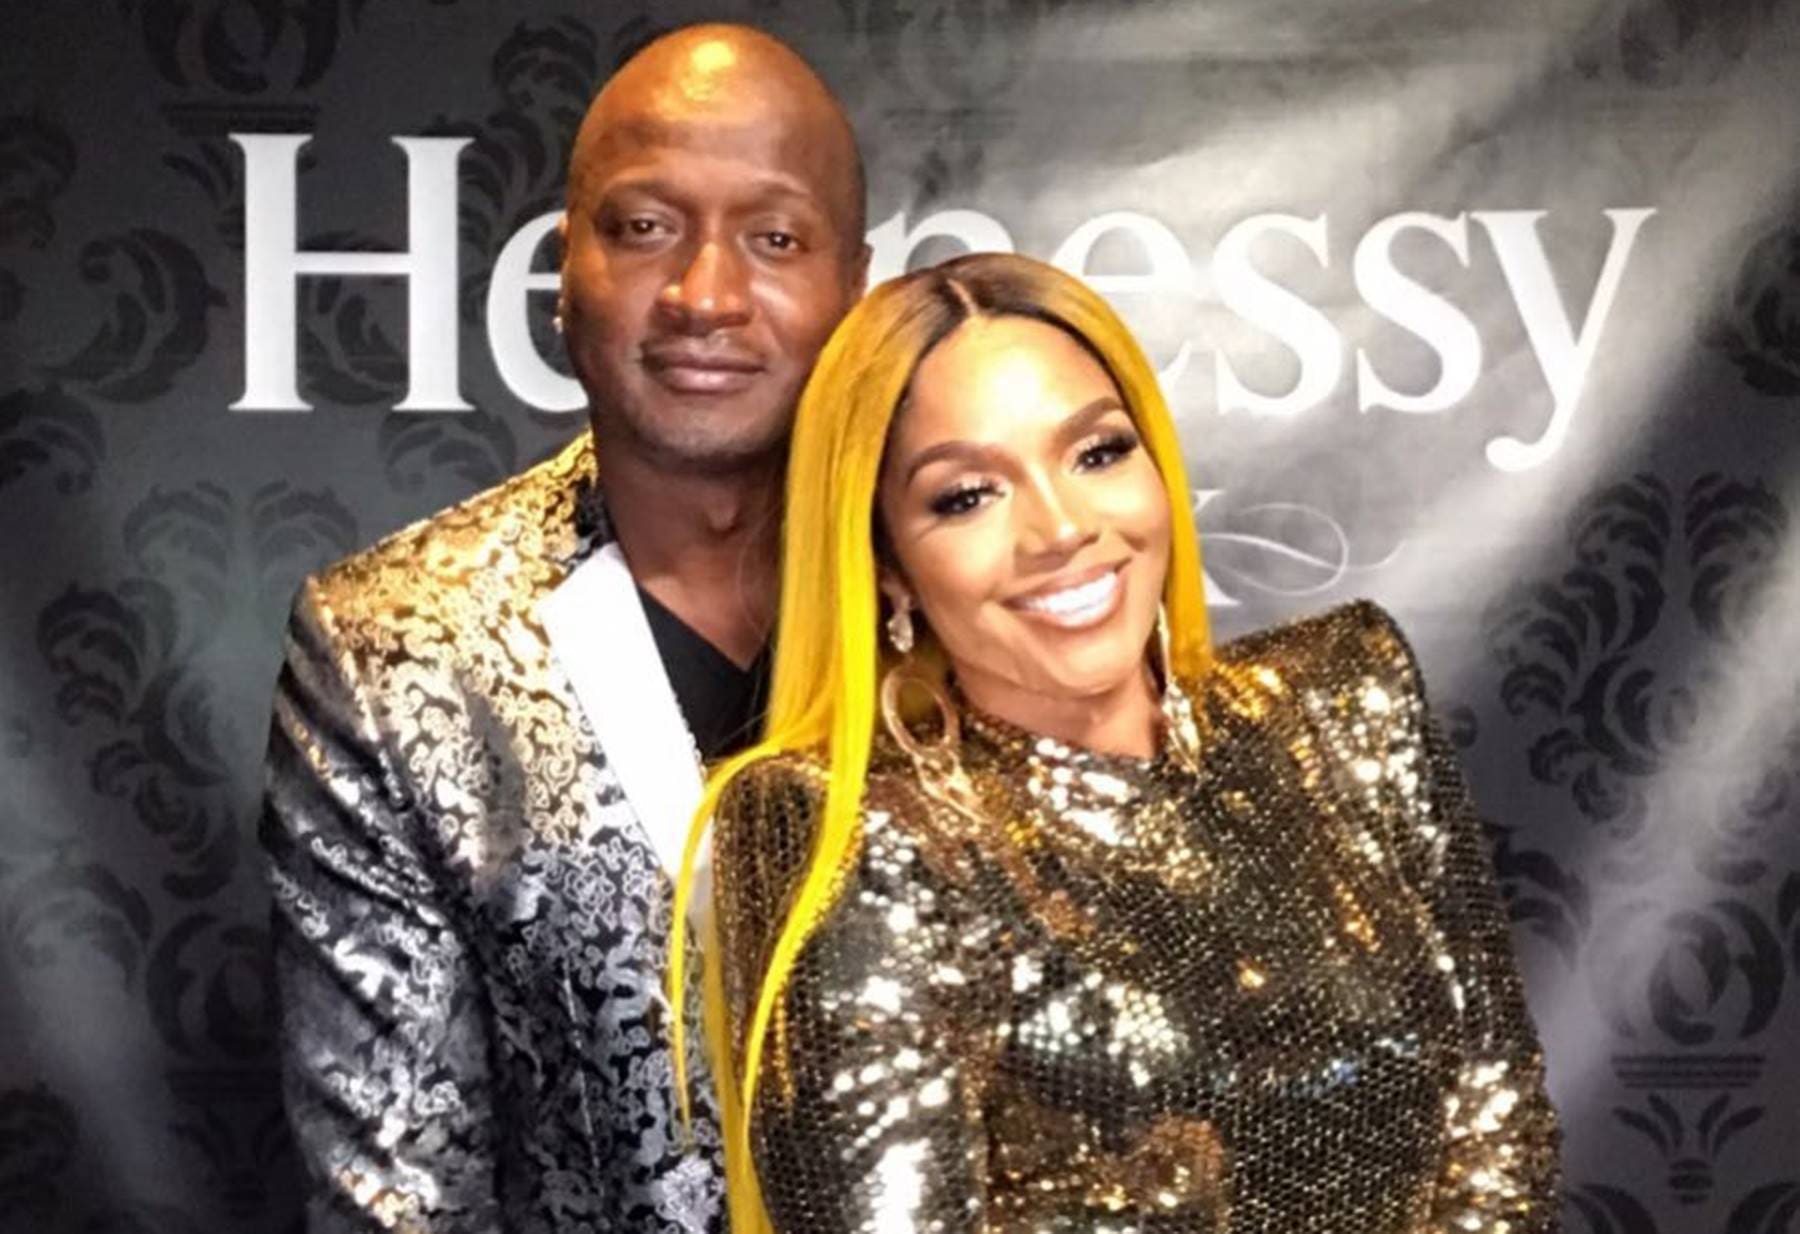 Rasheeda Frost's Fans Call Her And Kirk Frost 'Atlanta's King And Queen' - See Her Latest Photo